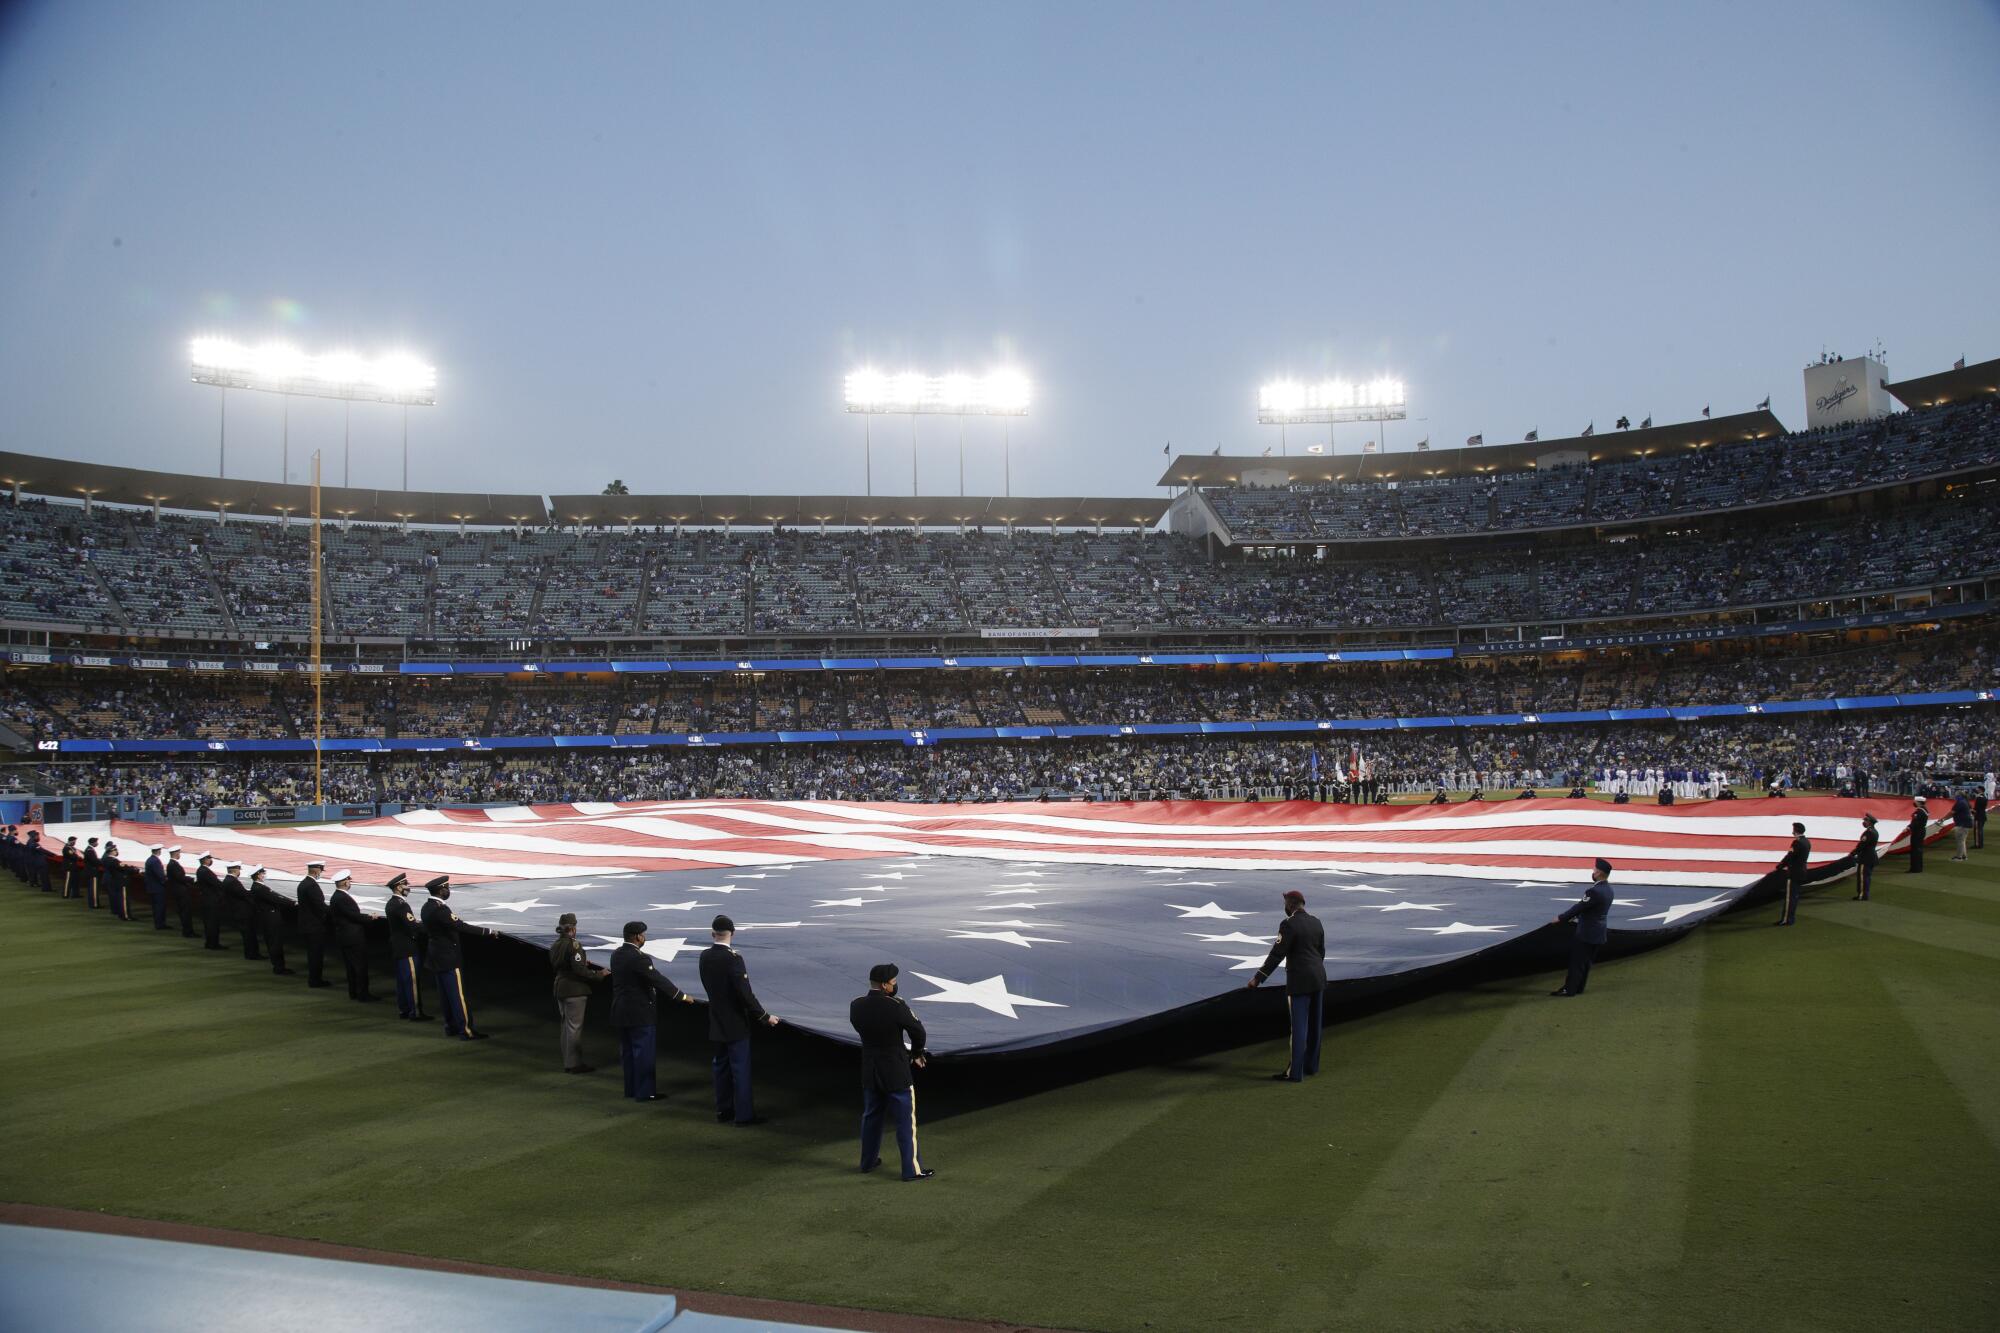 The American flag is displayed in the outfield during the national anthem